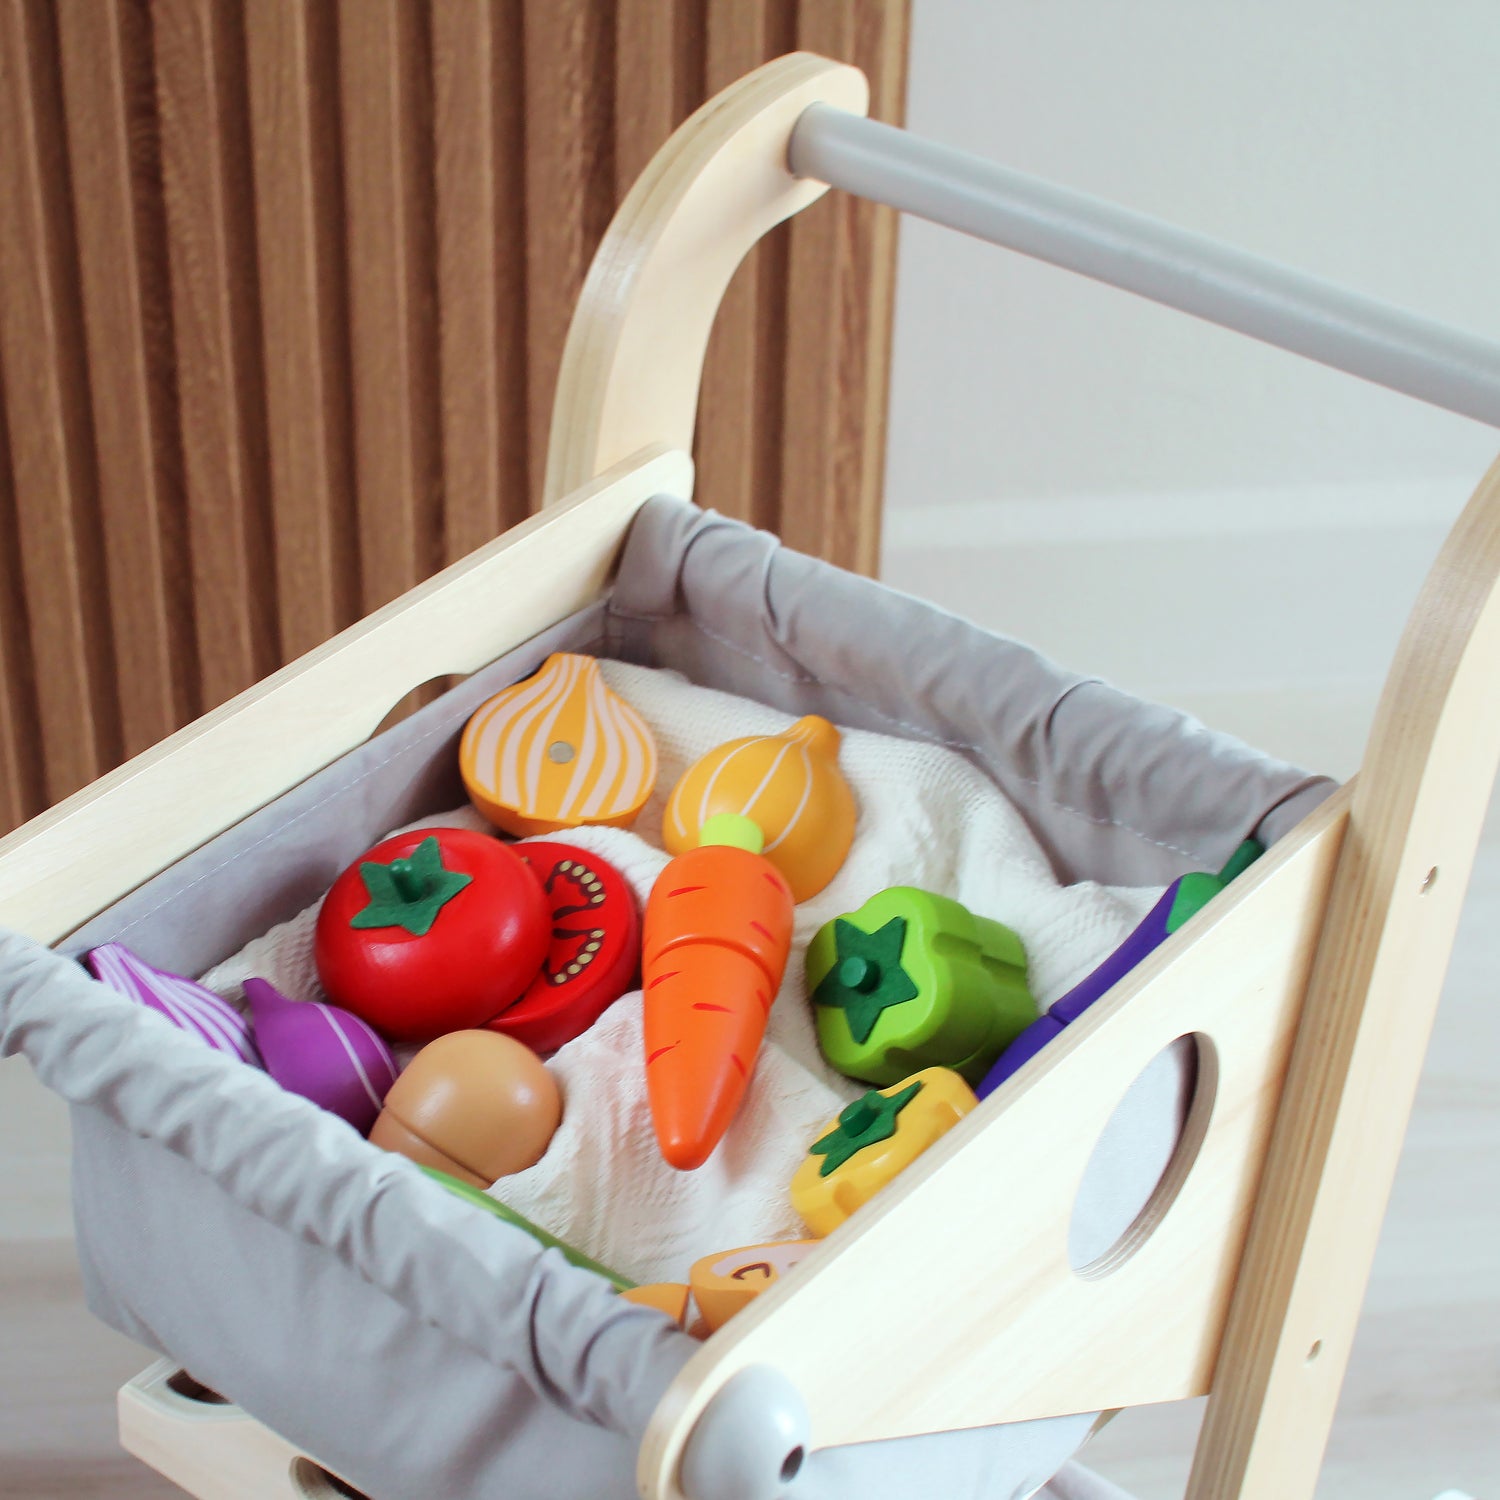 eco friendly colourful wooden vegetables - potato, mushroom, carrot, tomato, onion, eggplant, peppers, cucumber - wooden knife included with tray (cart not included)